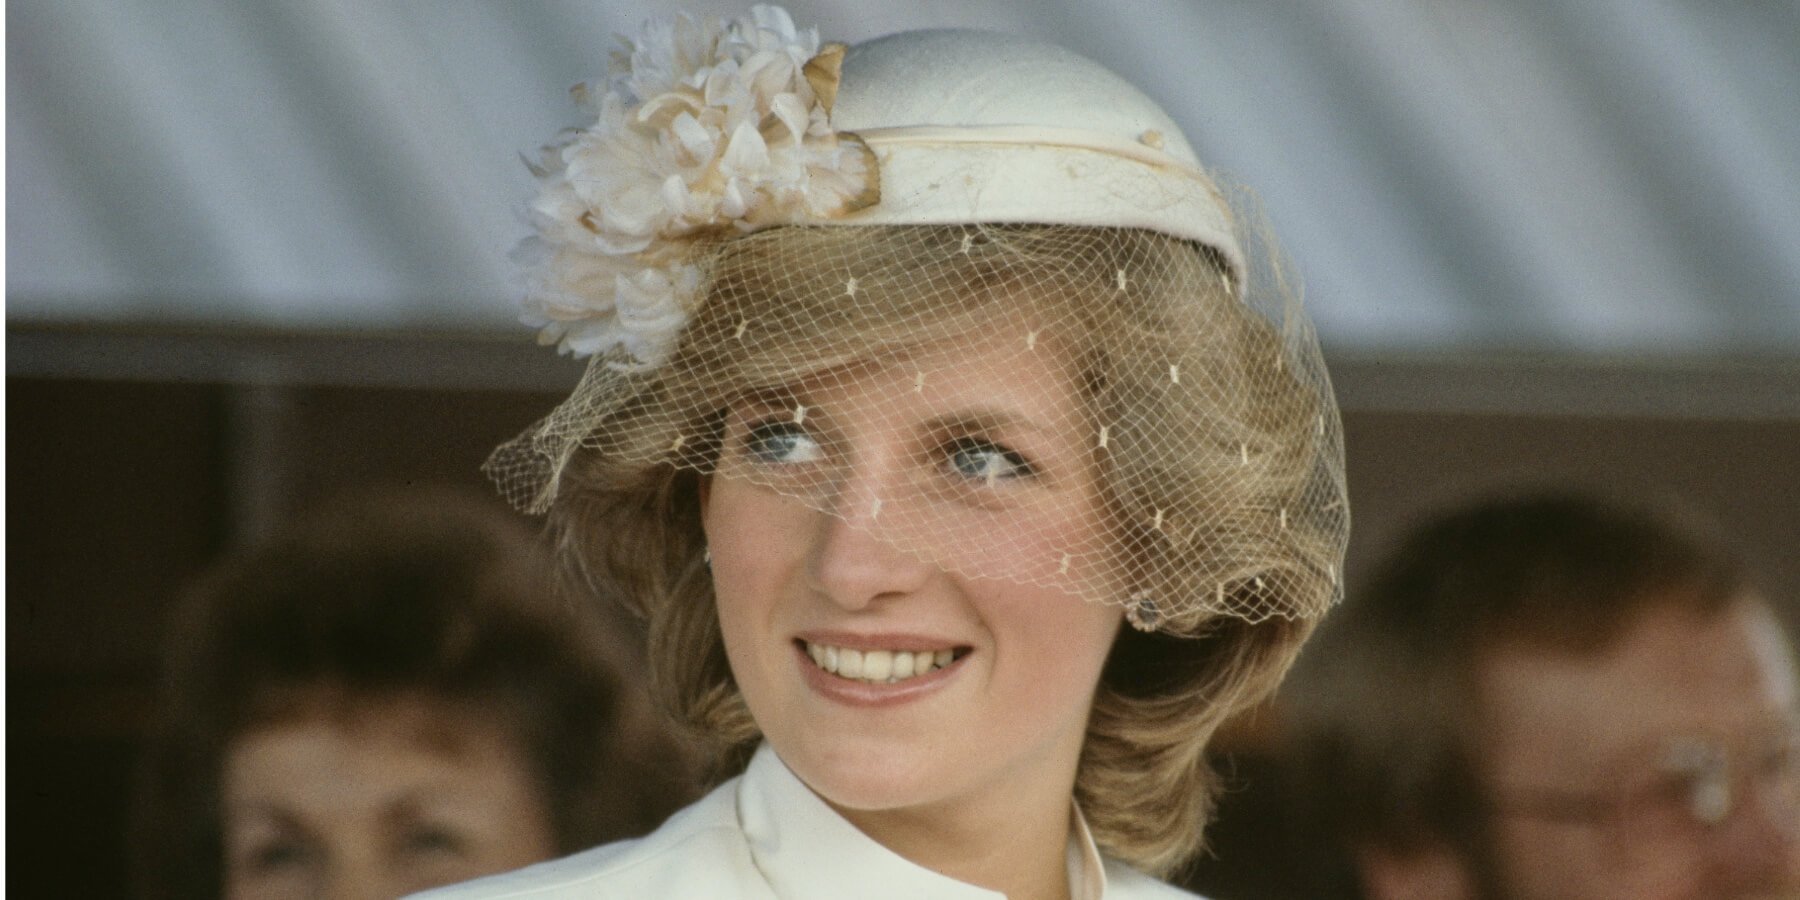 Princess Diana was photographed in 1983 at a welcome ceremony in Tauranga, New Zealand.